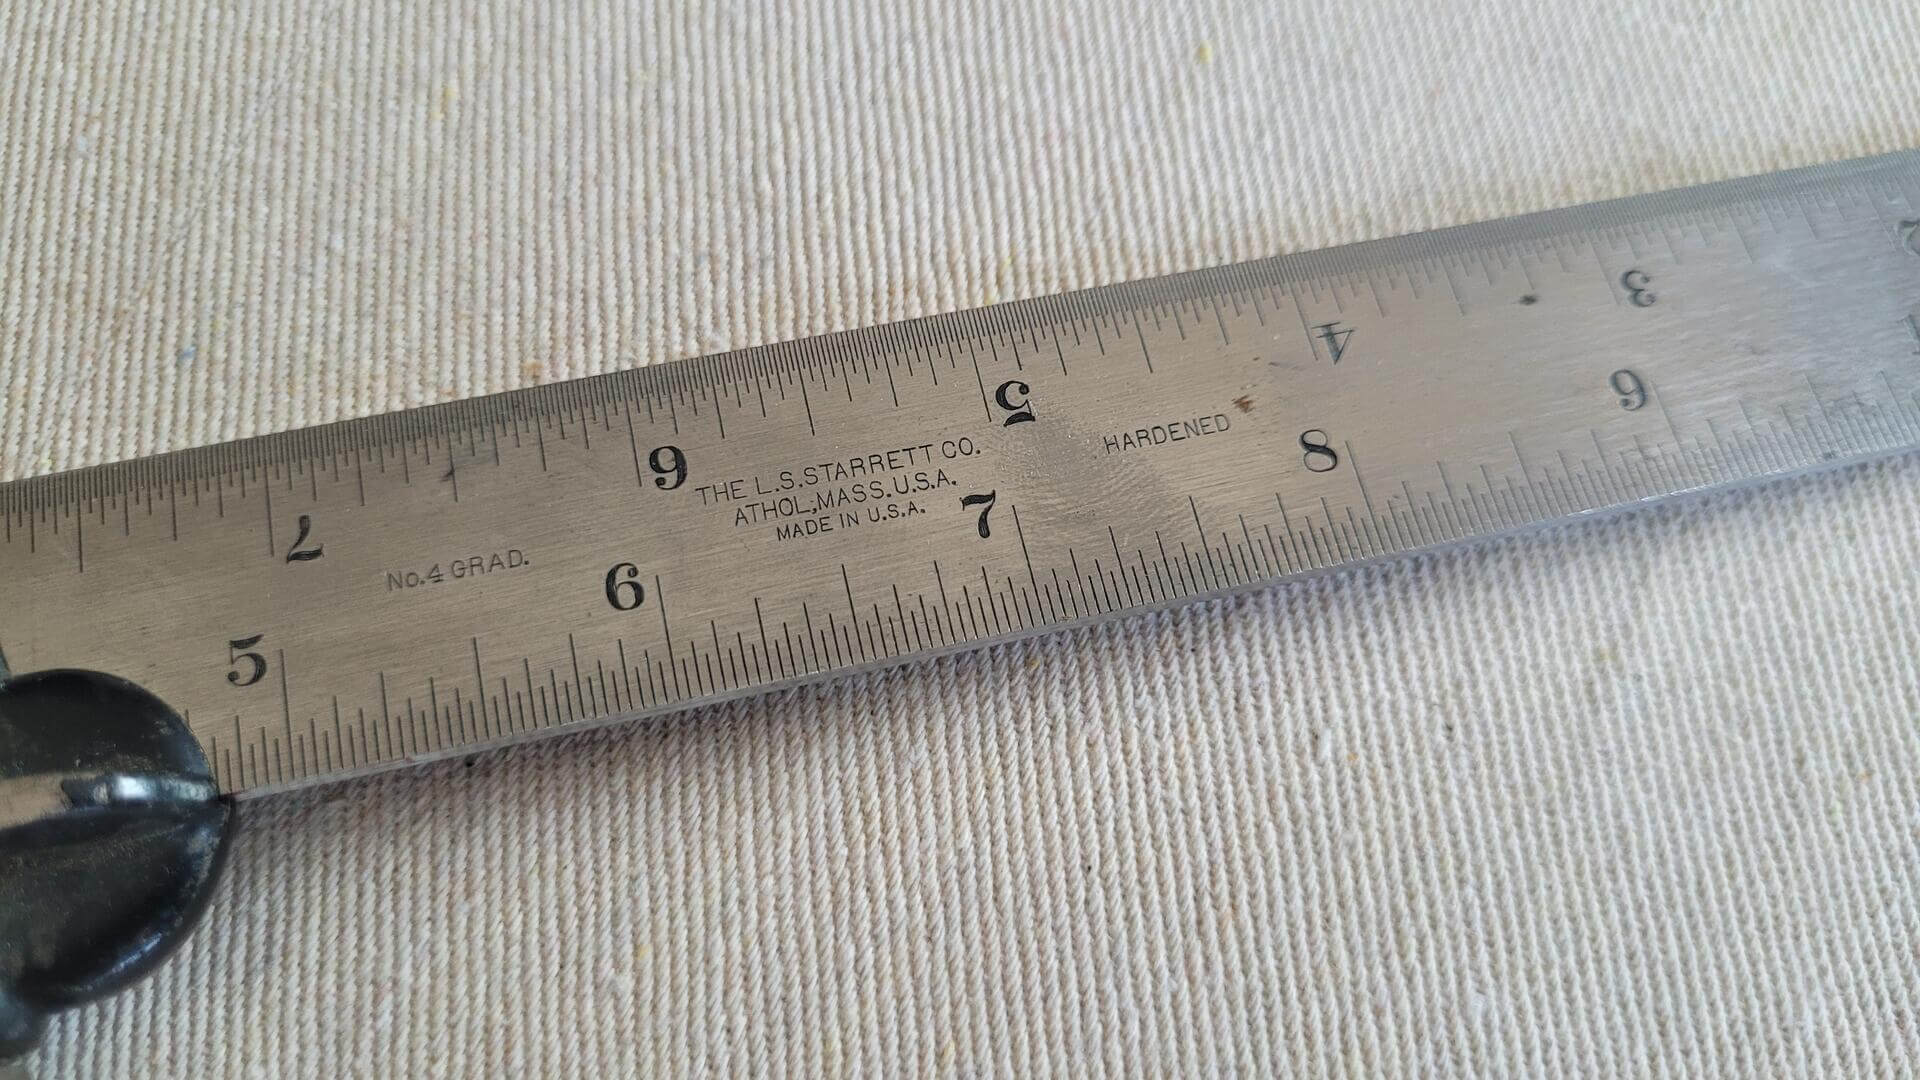 Vintage L.S. Starrett Co No. 4 Grad. 12 inches hardened combination square with the Center-Finding head. Antique made in USA collectible Starrett Athol Mass. marking and measuring layout tools